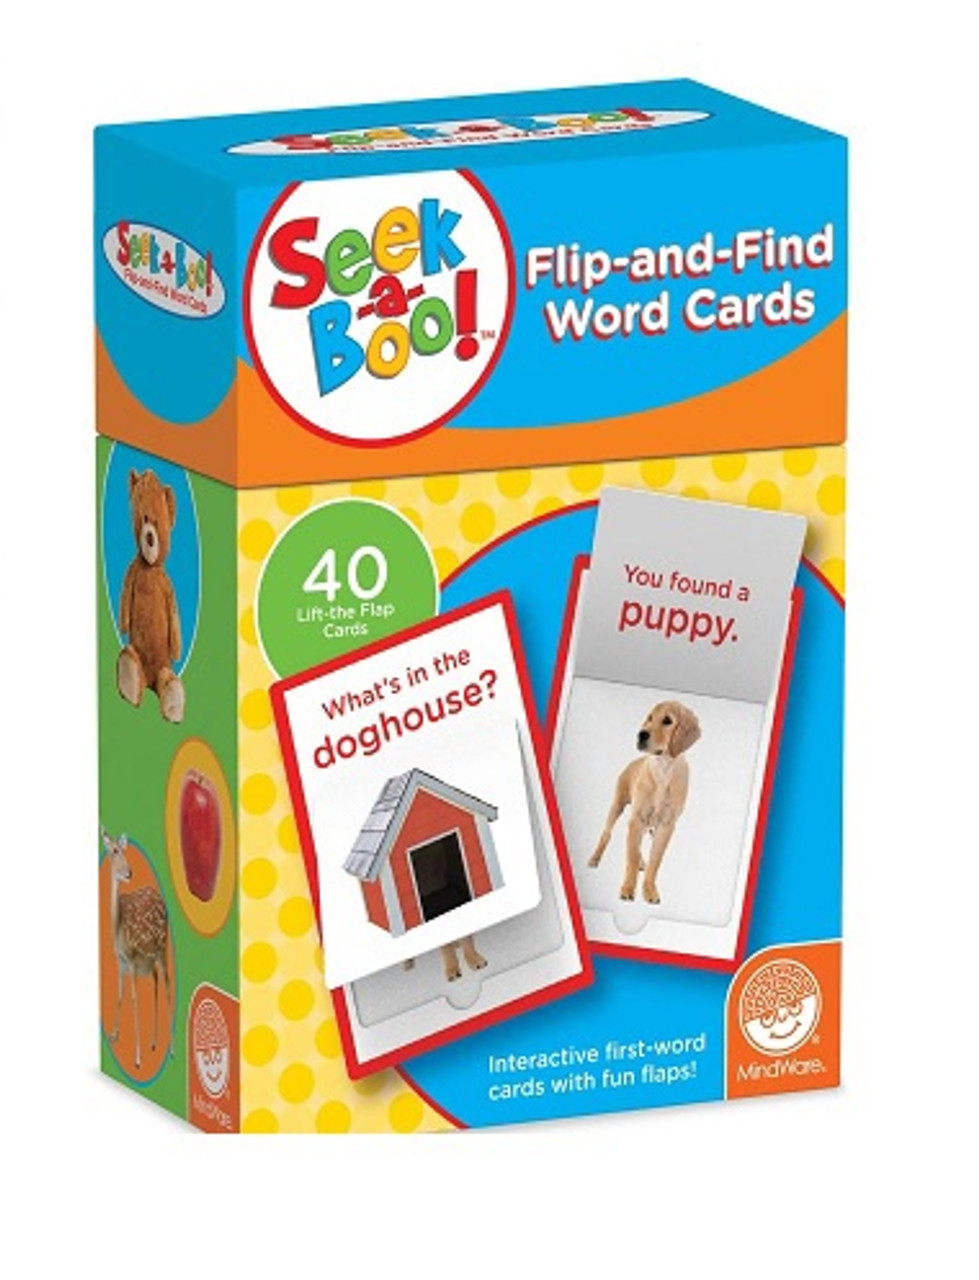 SEEK-A-BOO FLIP-AND-FIND WORD CARDS